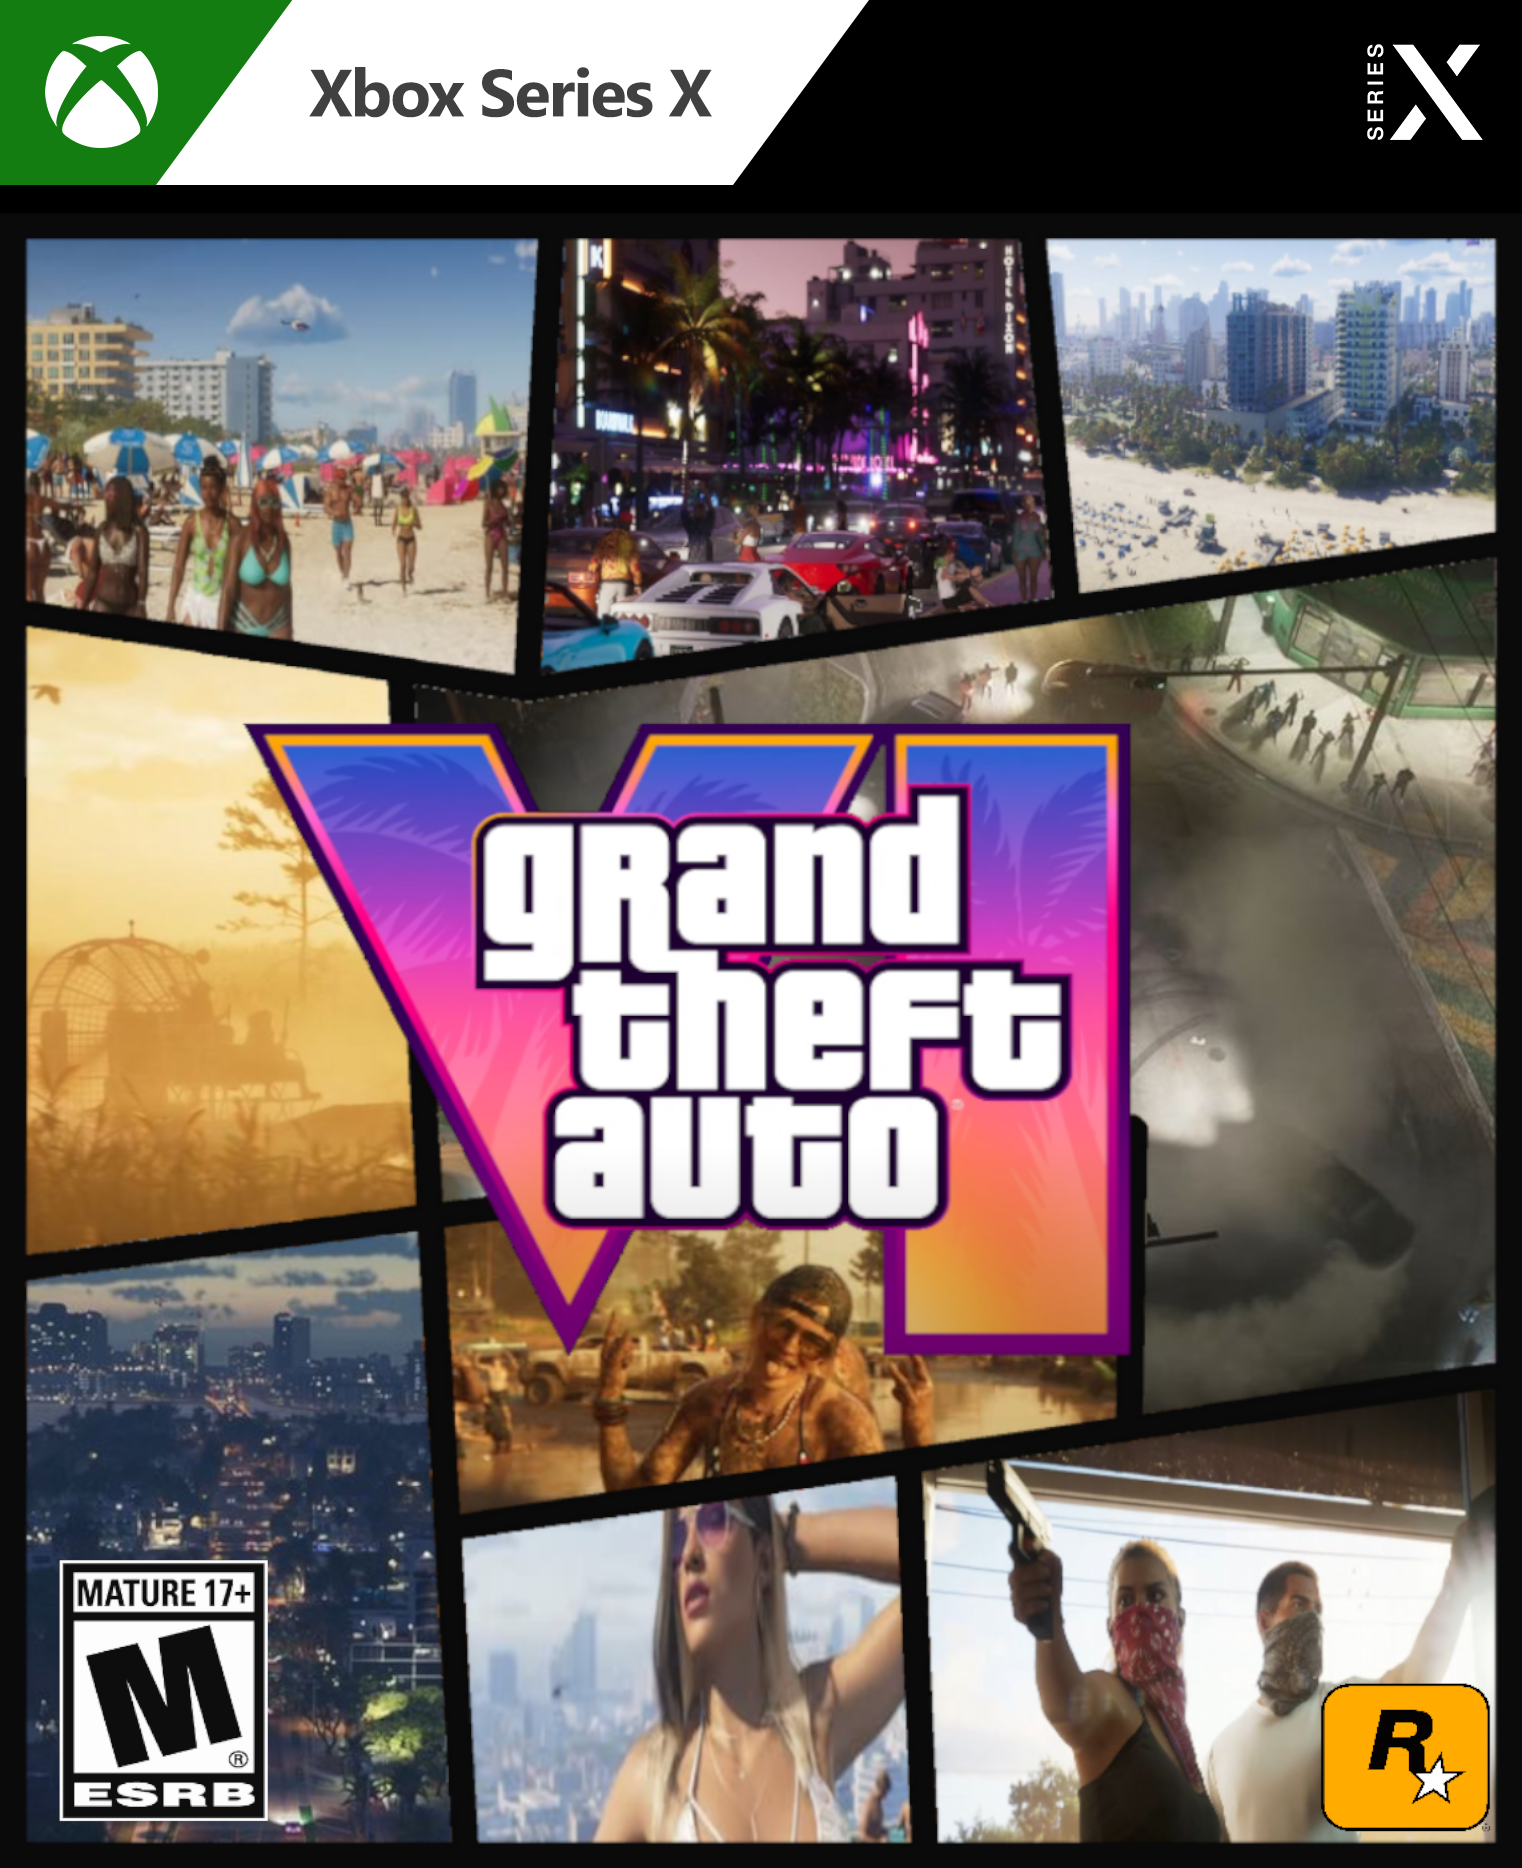 craphix on X: Grand Theft Auto 6 Cover Art PS4 / Xbox One Versions RT &  FAV if you Like  / X